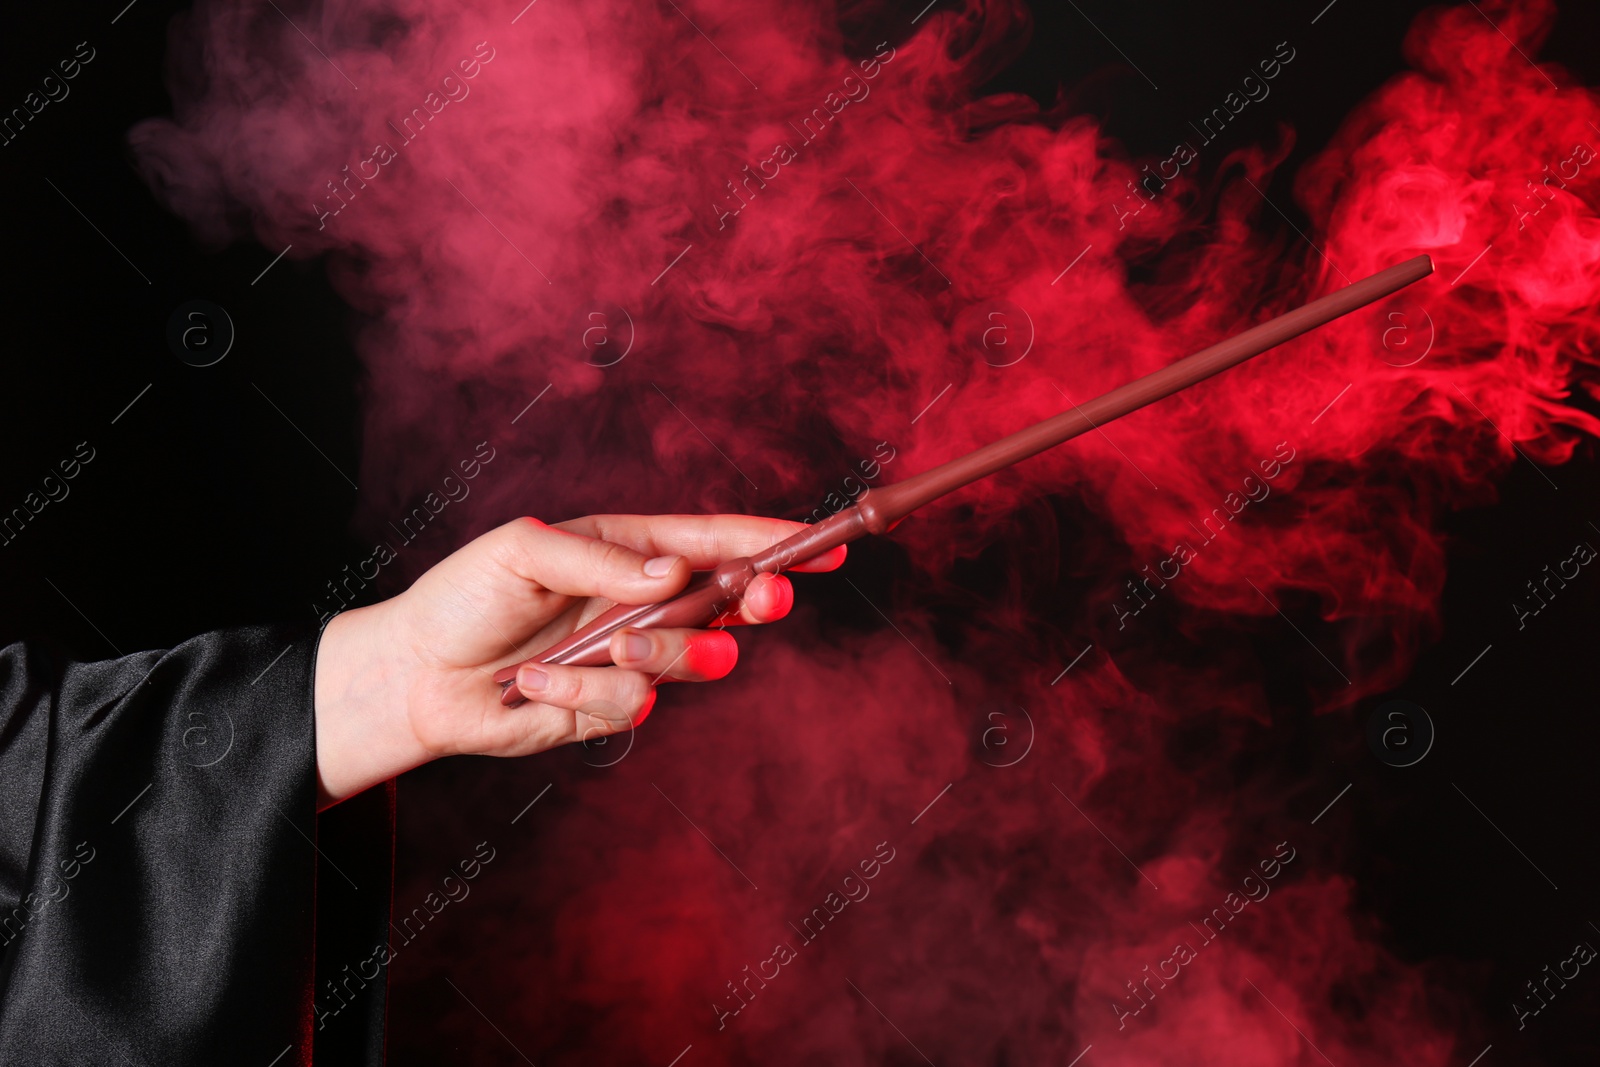 Photo of Magician holding wand in smoke on dark background, closeup